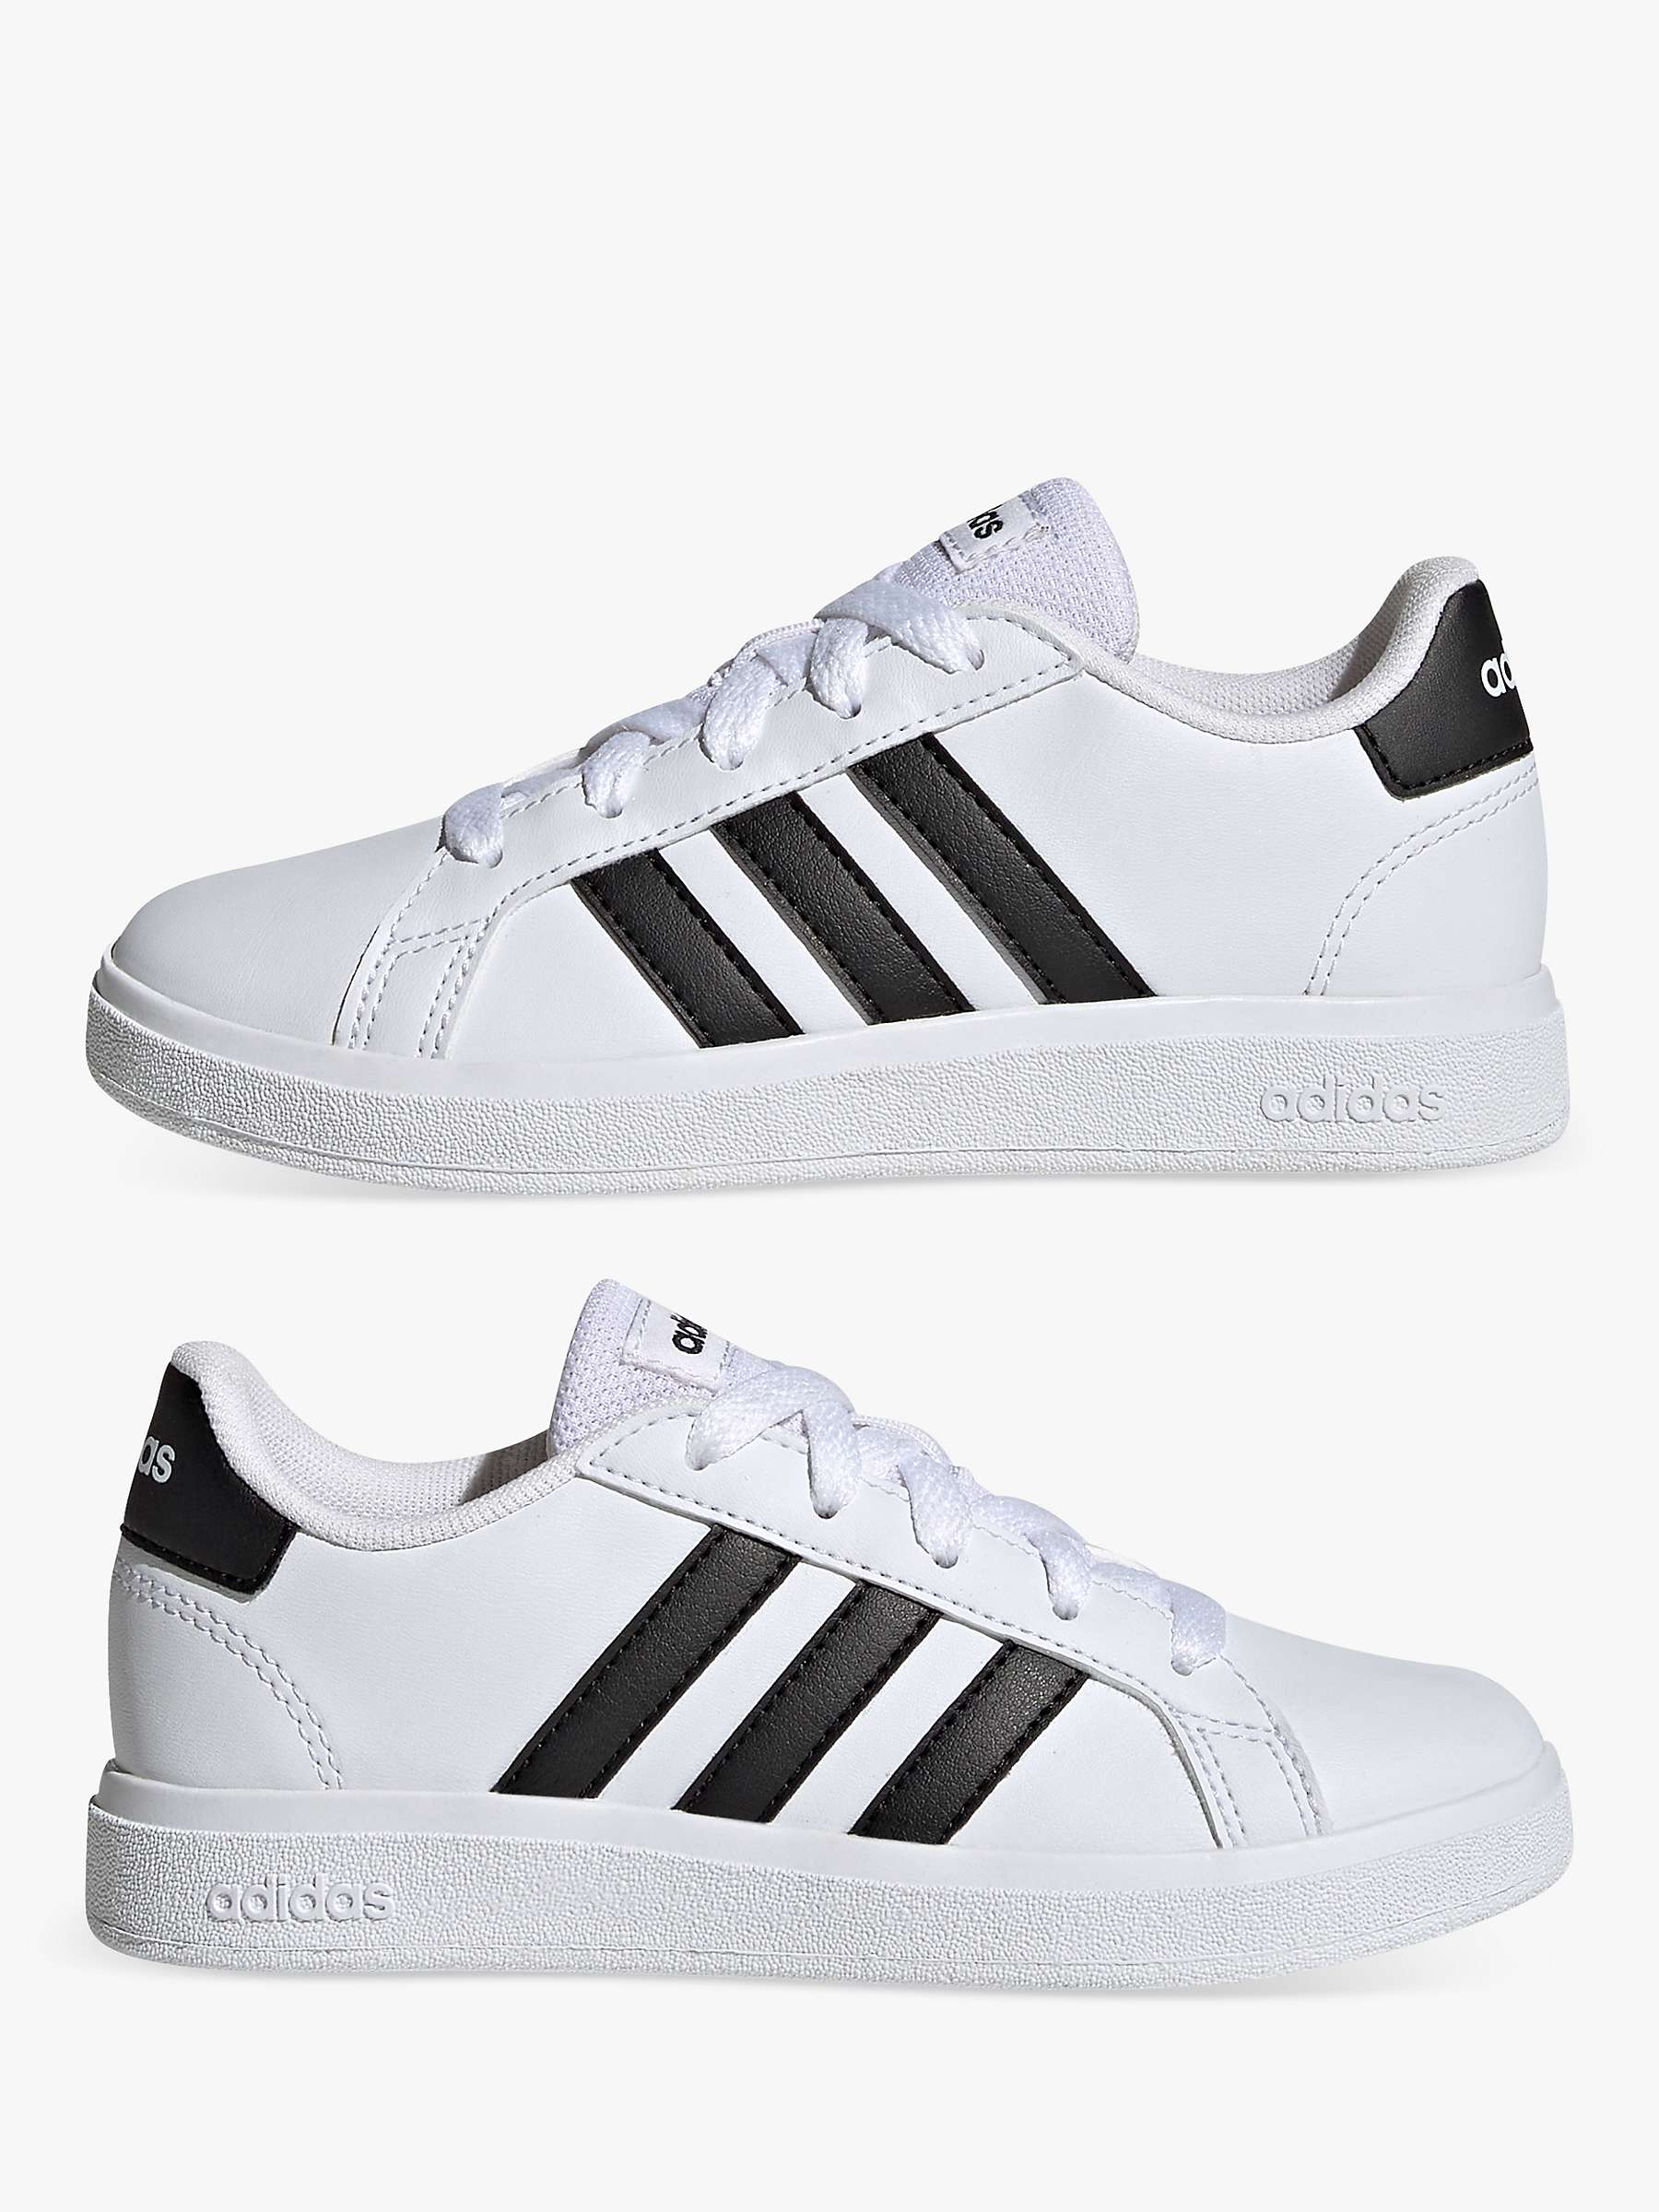 Buy adidas Kids' Grand Court 2.0 Trainers, White/Black Online at johnlewis.com